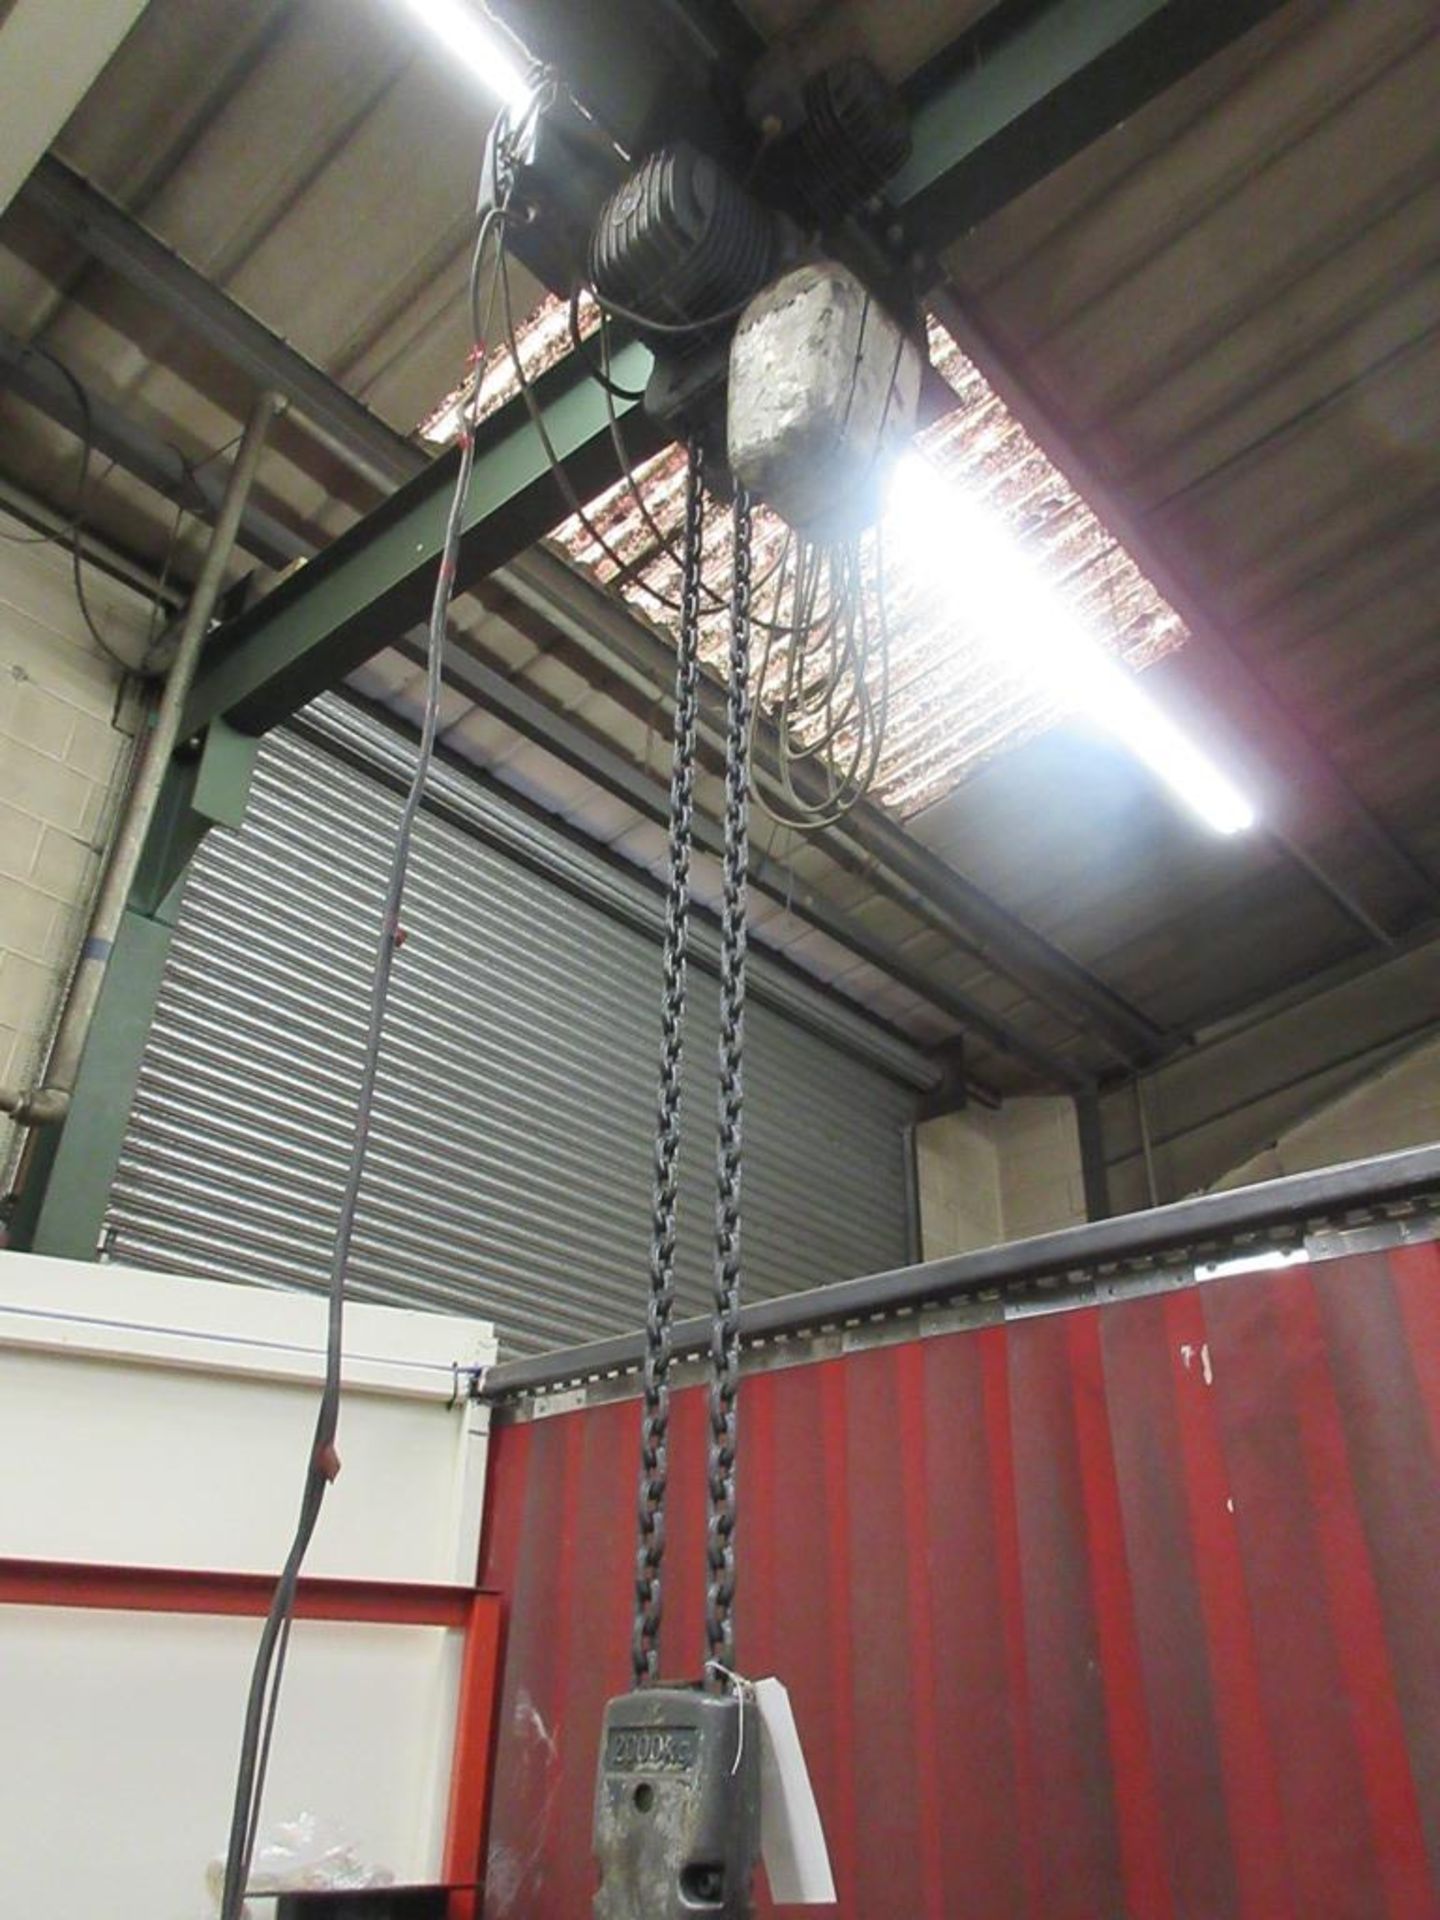 Demag 2000kg chain block & hoist, with pendant control NB: This item has no record of Thorough